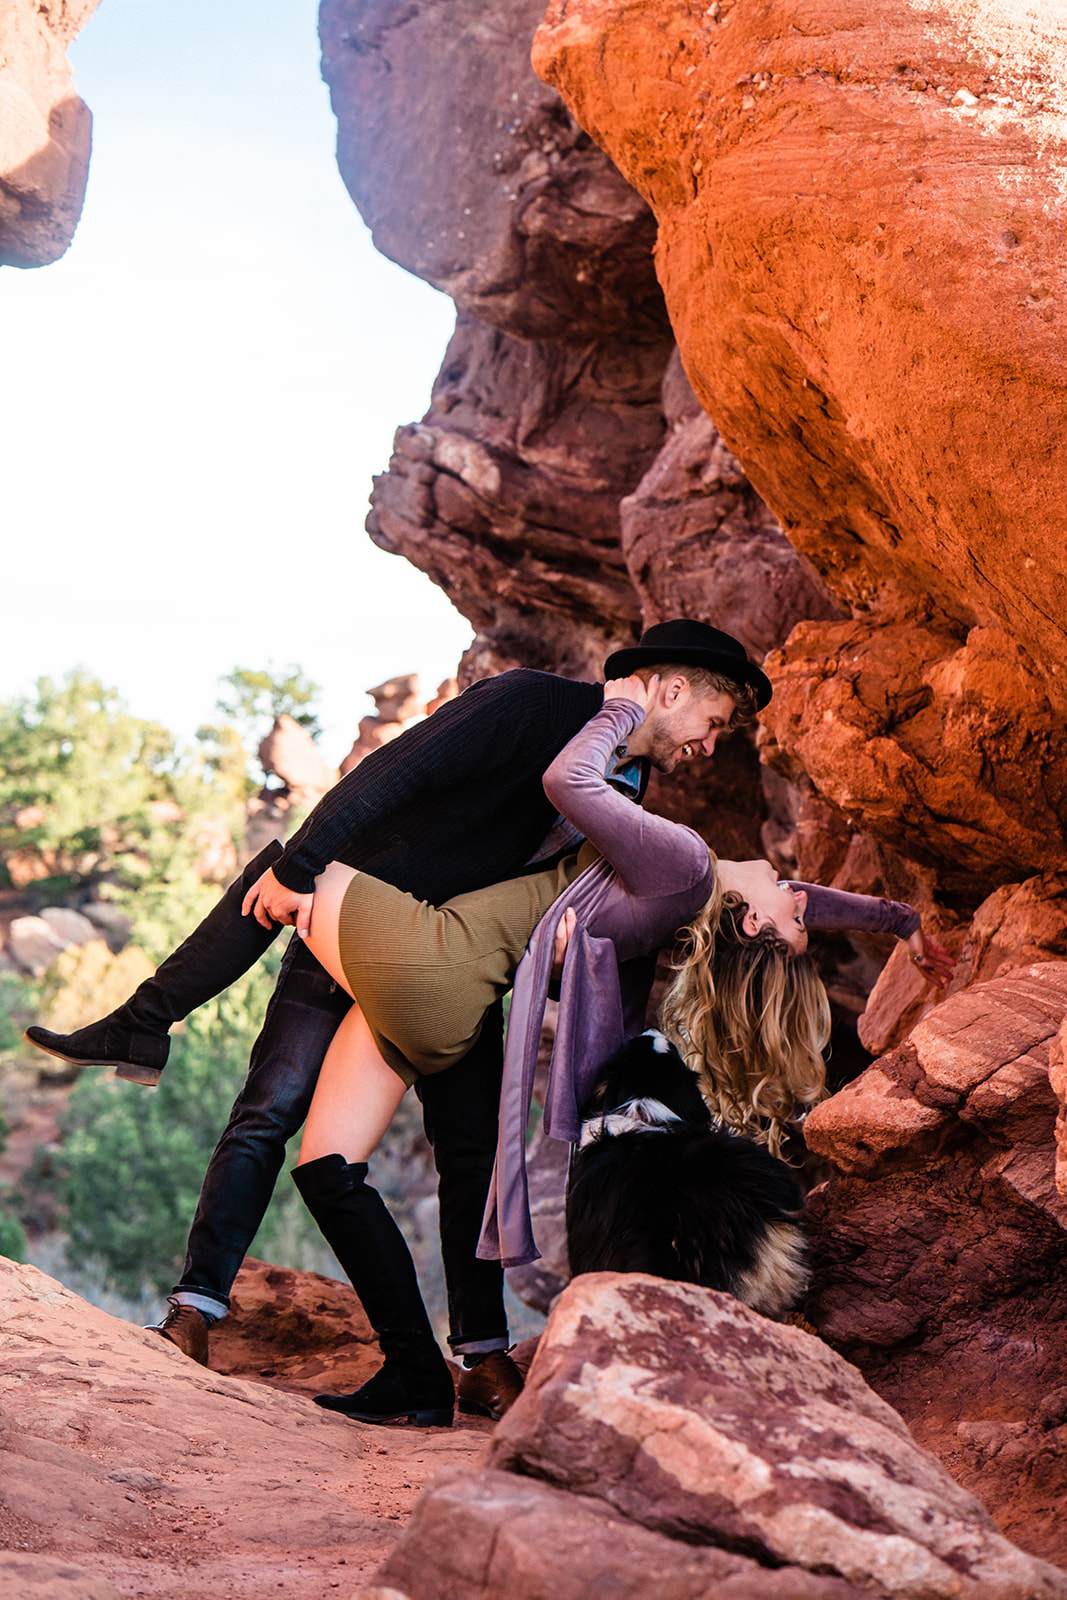 Adorable couple acting silly at the Garden of the Gods